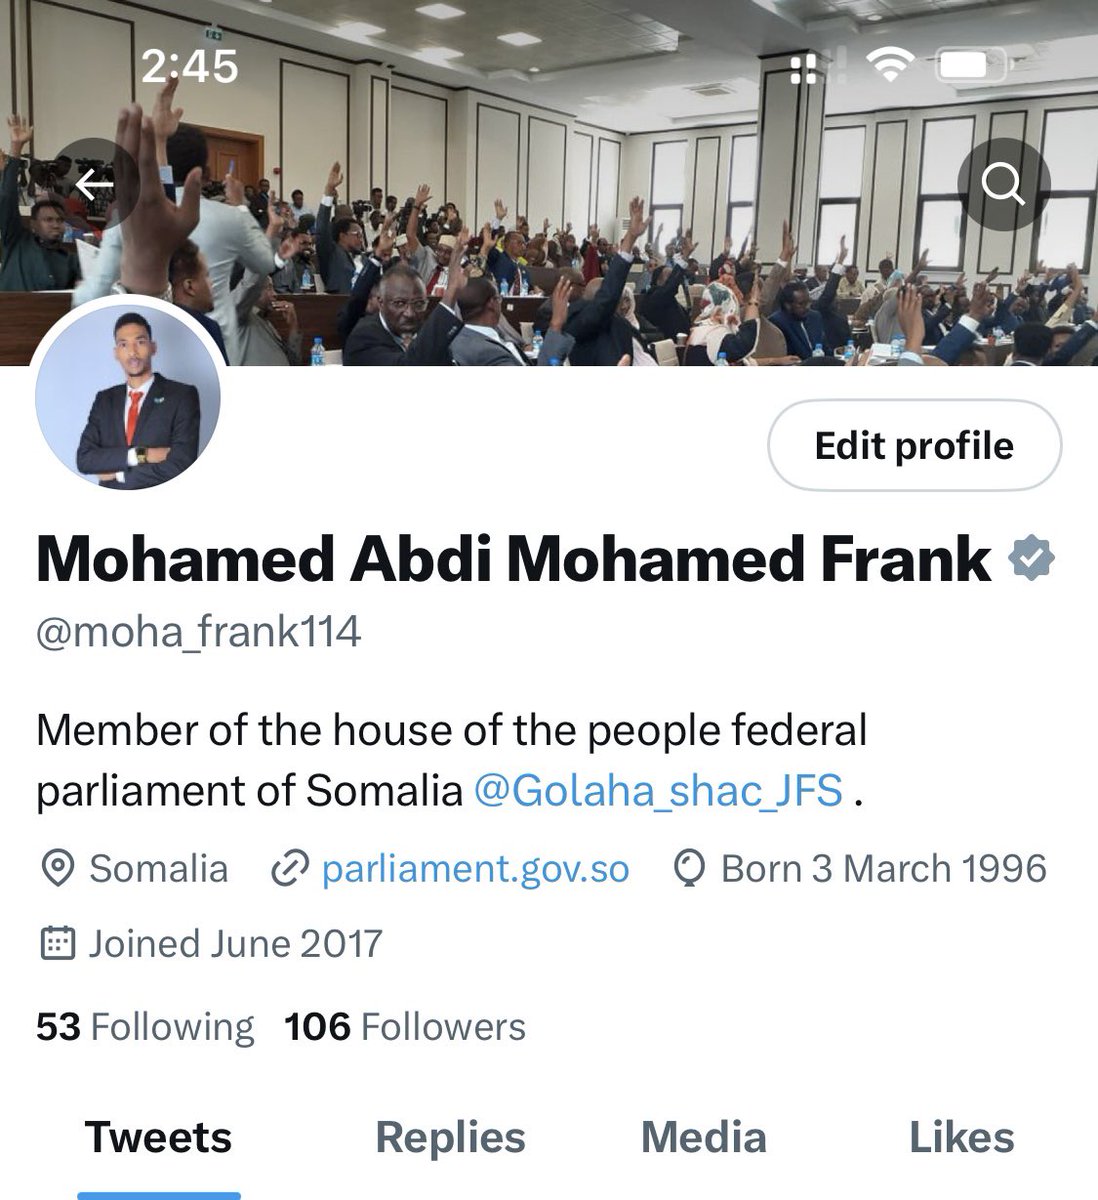 Finally my Twitter account has been verified! Thank you @HusseinidowAli for your excellent support.